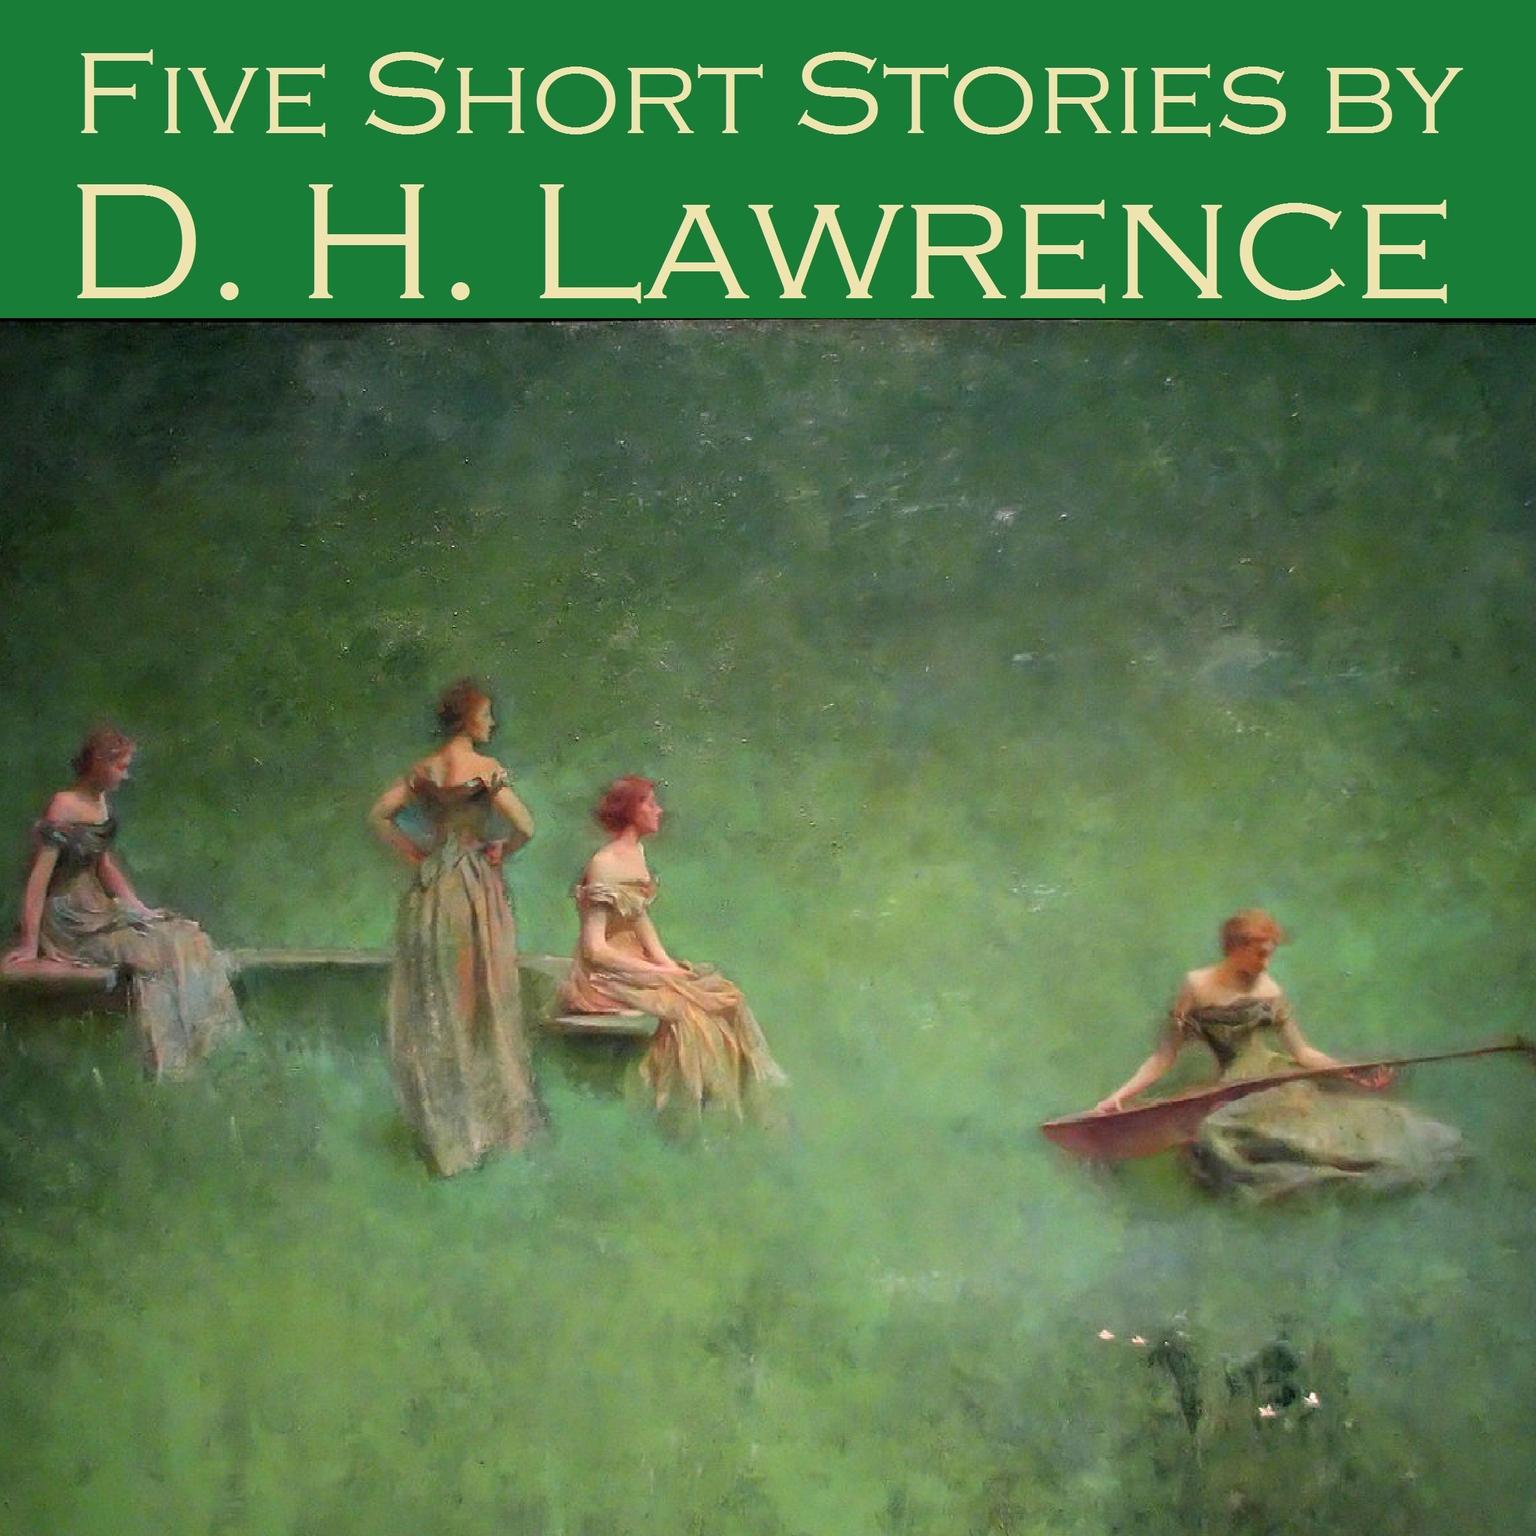 Five Short Stories by D. H. Lawrence Audiobook, by D. H. Lawrence